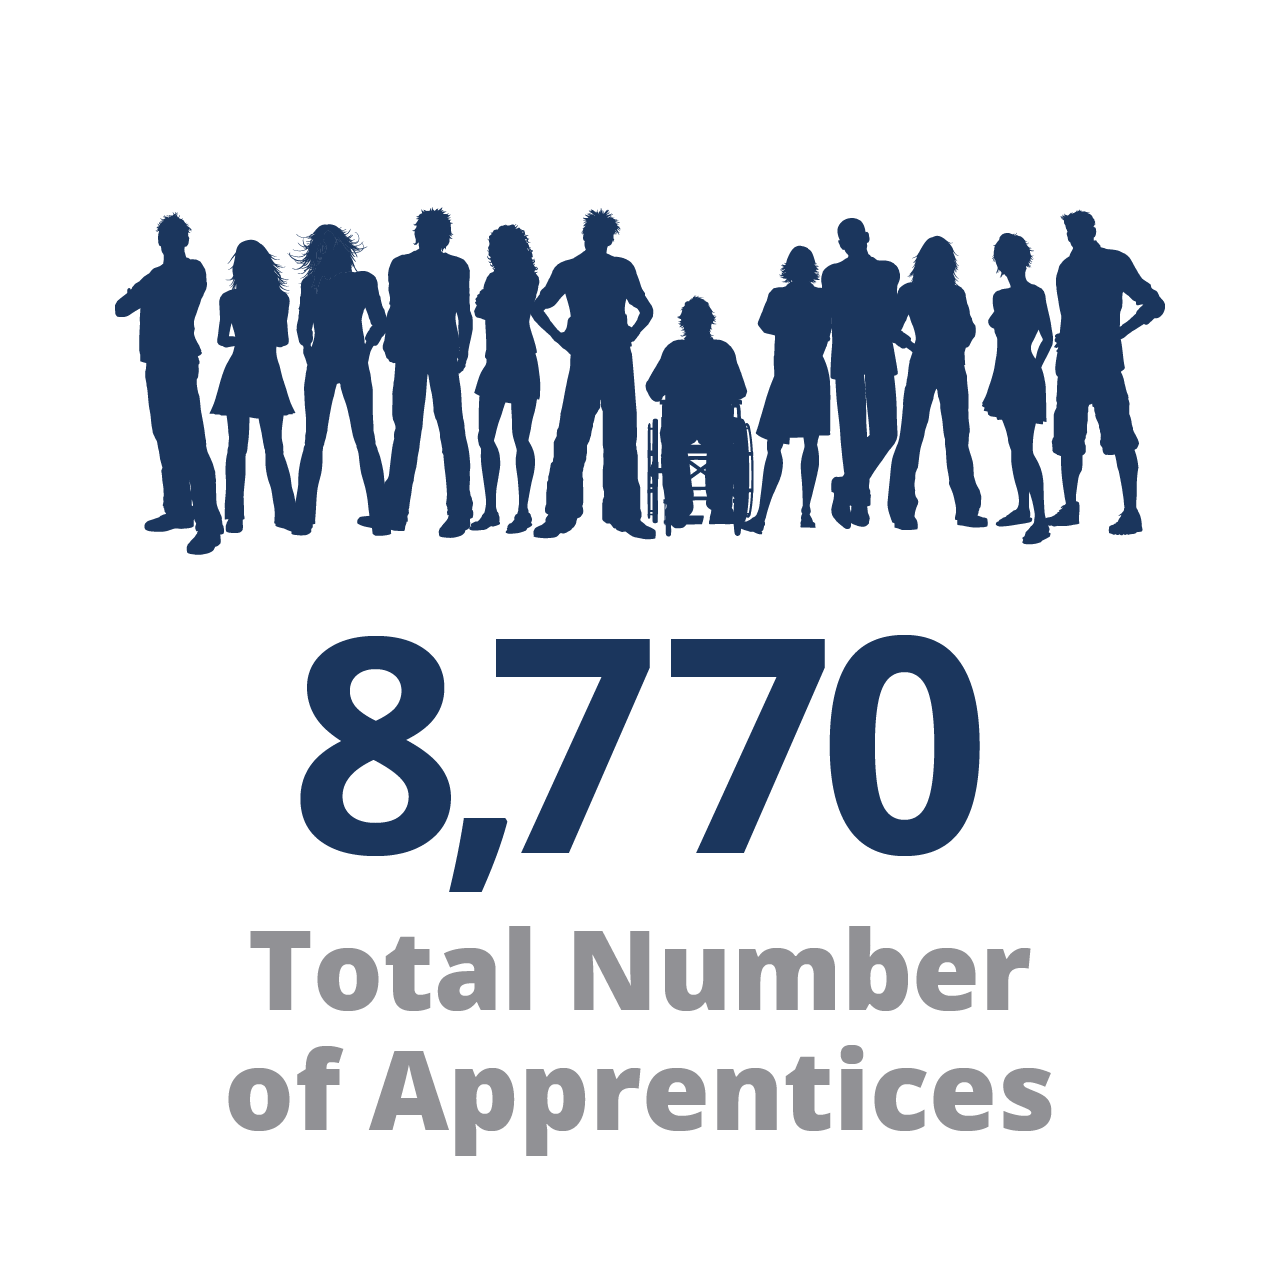 8,770 Total Number of Apprentices